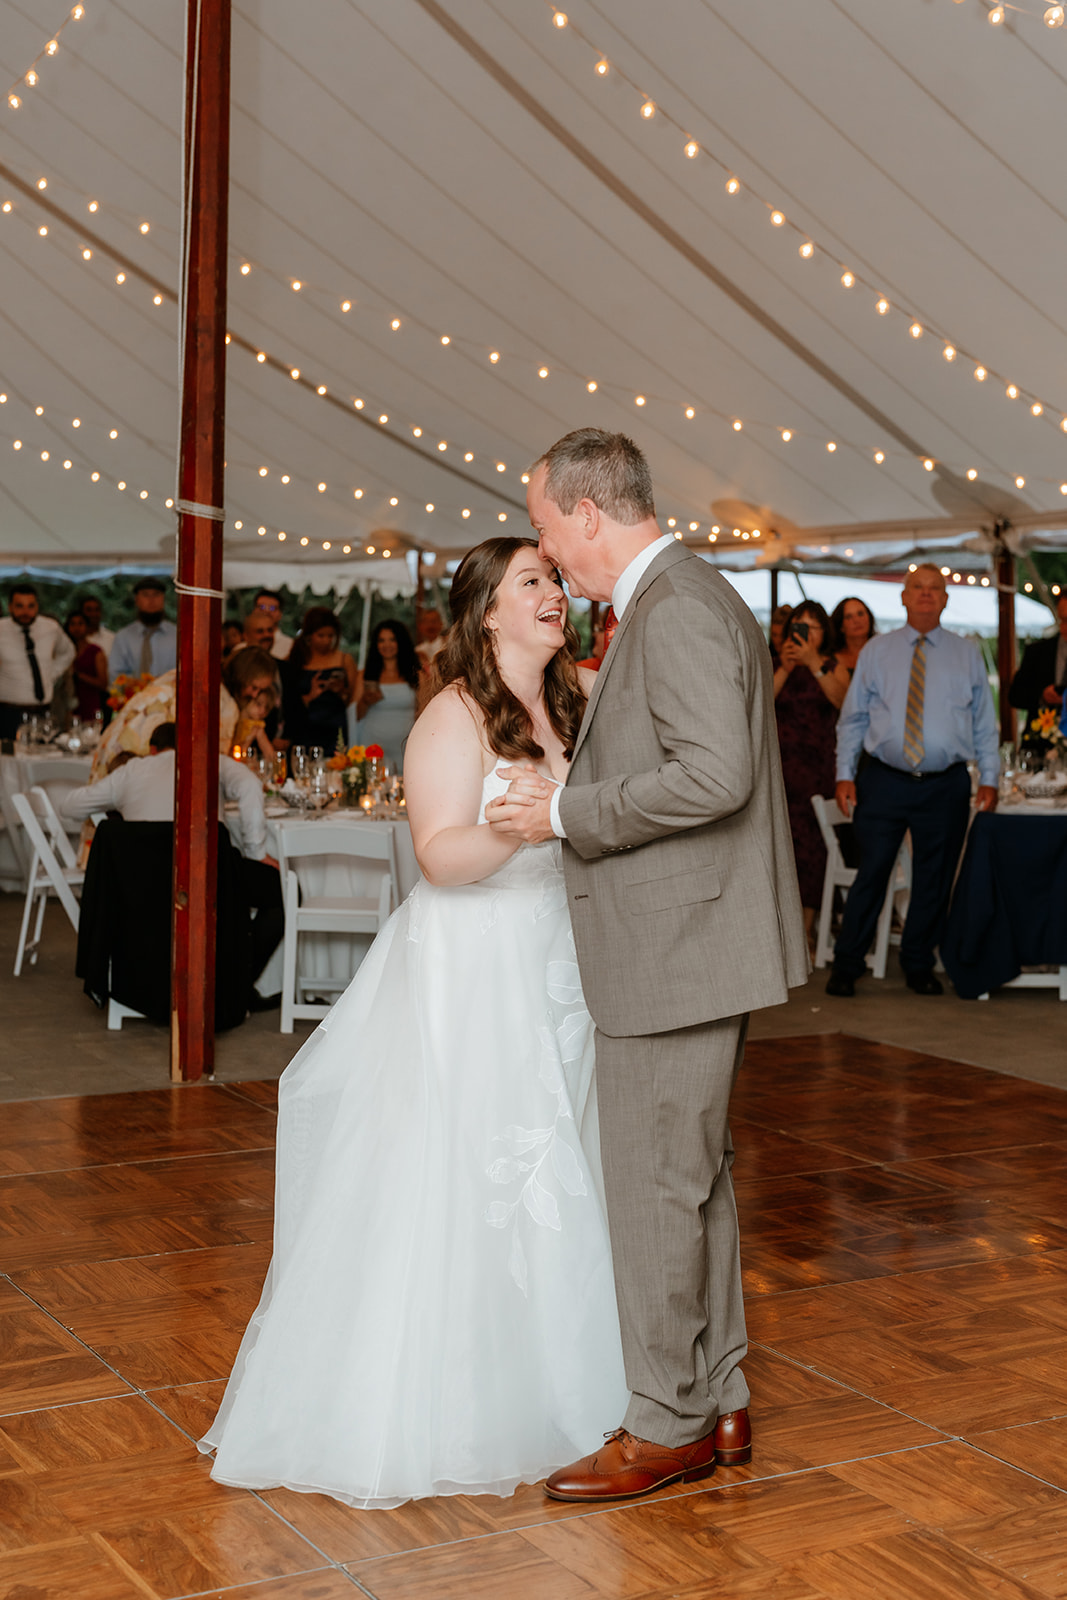 A bride and groom smiling and dancing under a tent with string lights, surrounded by guests.